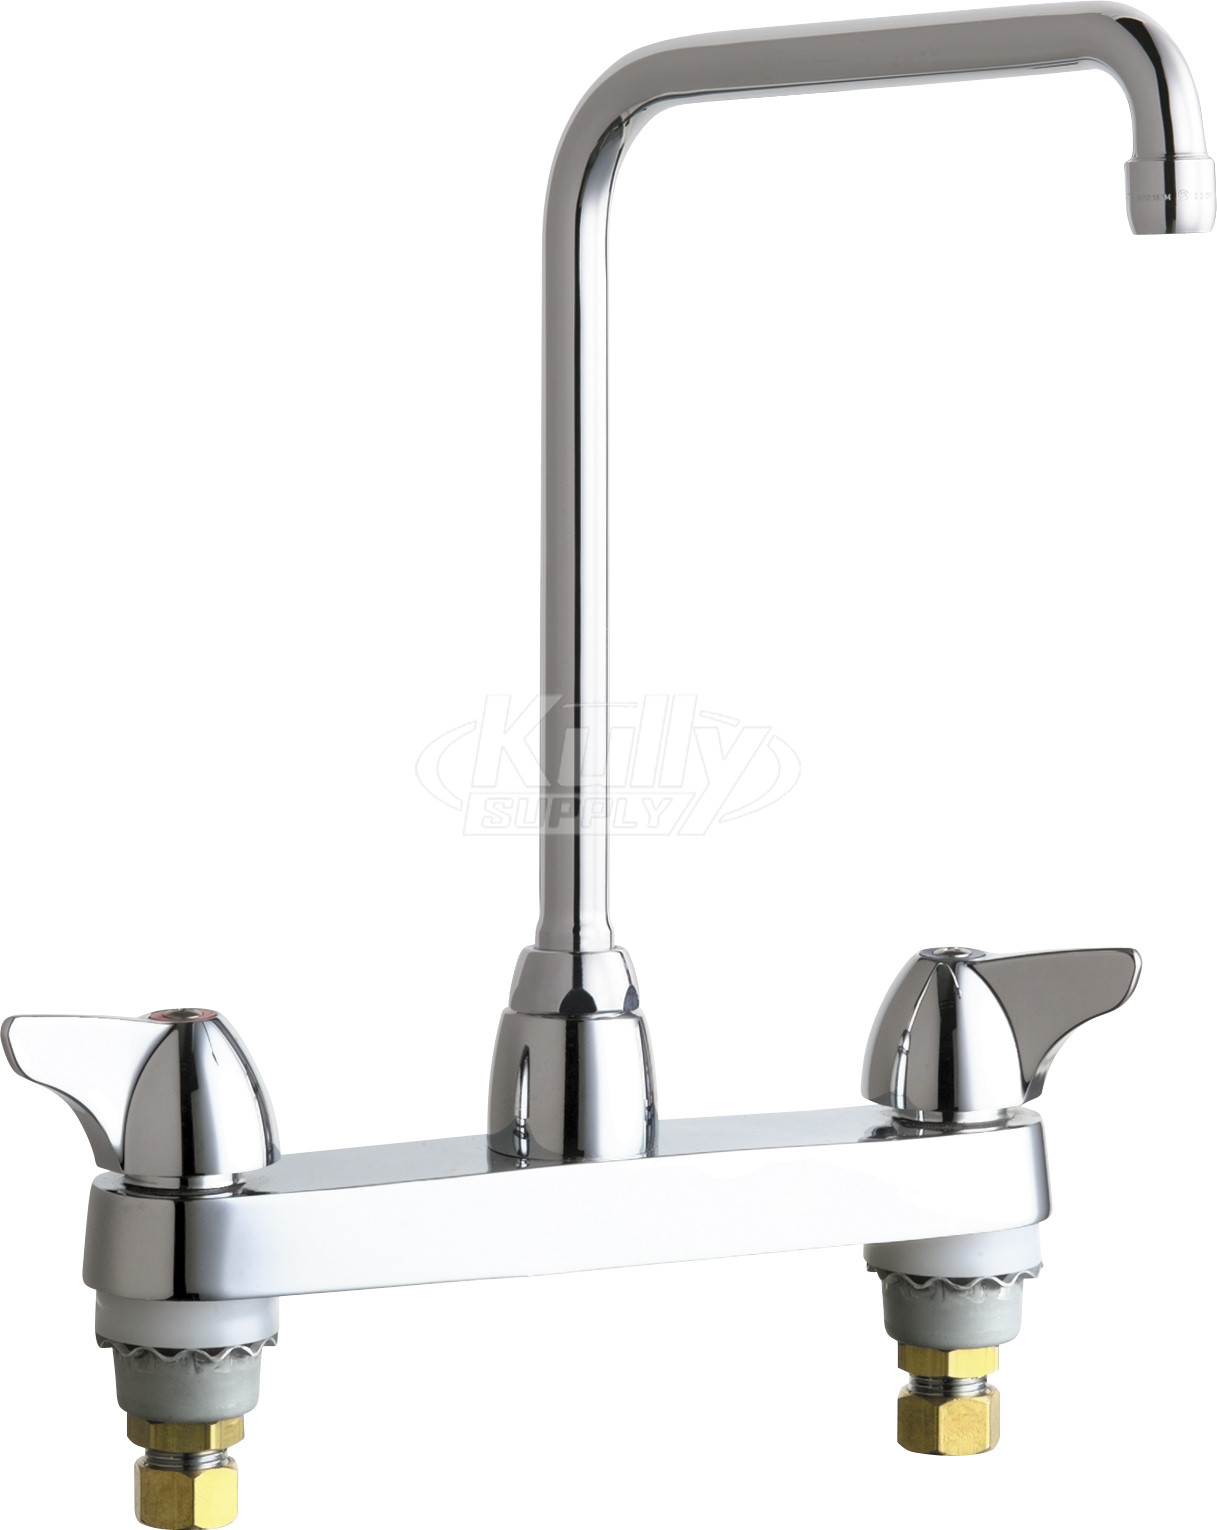 Chicago 1100-HA8ABCP Hot and Cold Water Sink Faucet